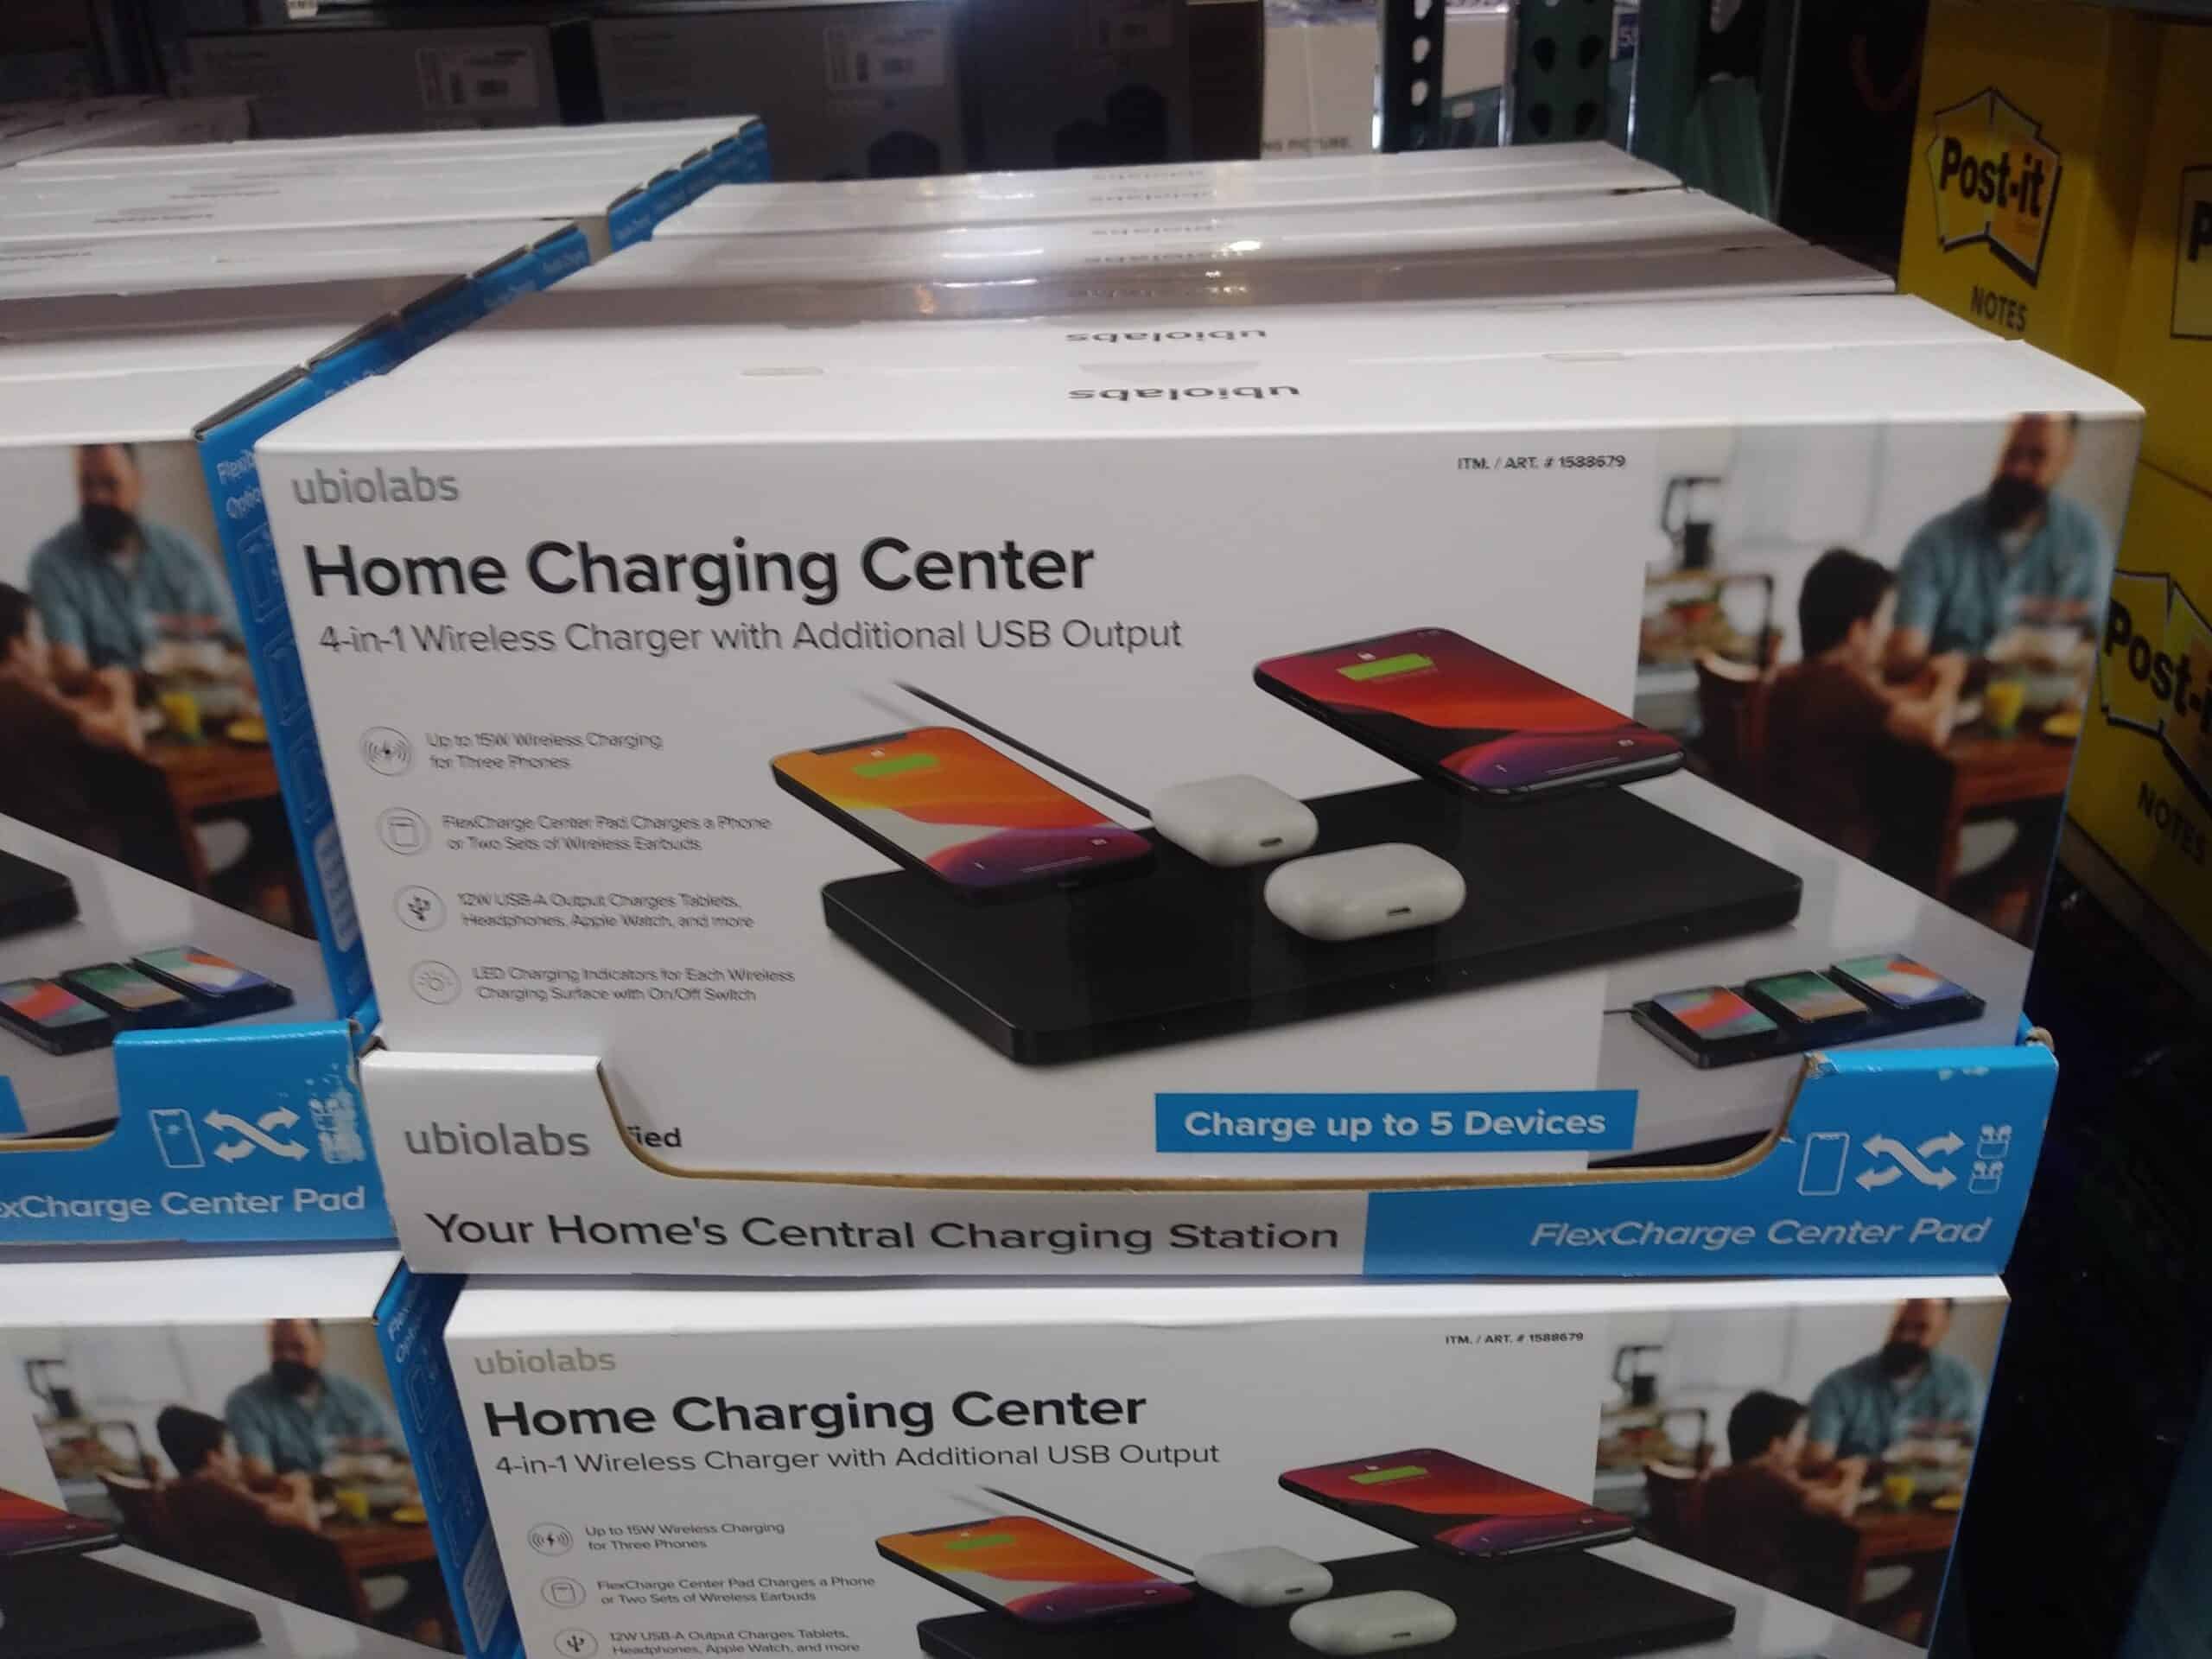 Ubiolabs Home Charging Center $29.97